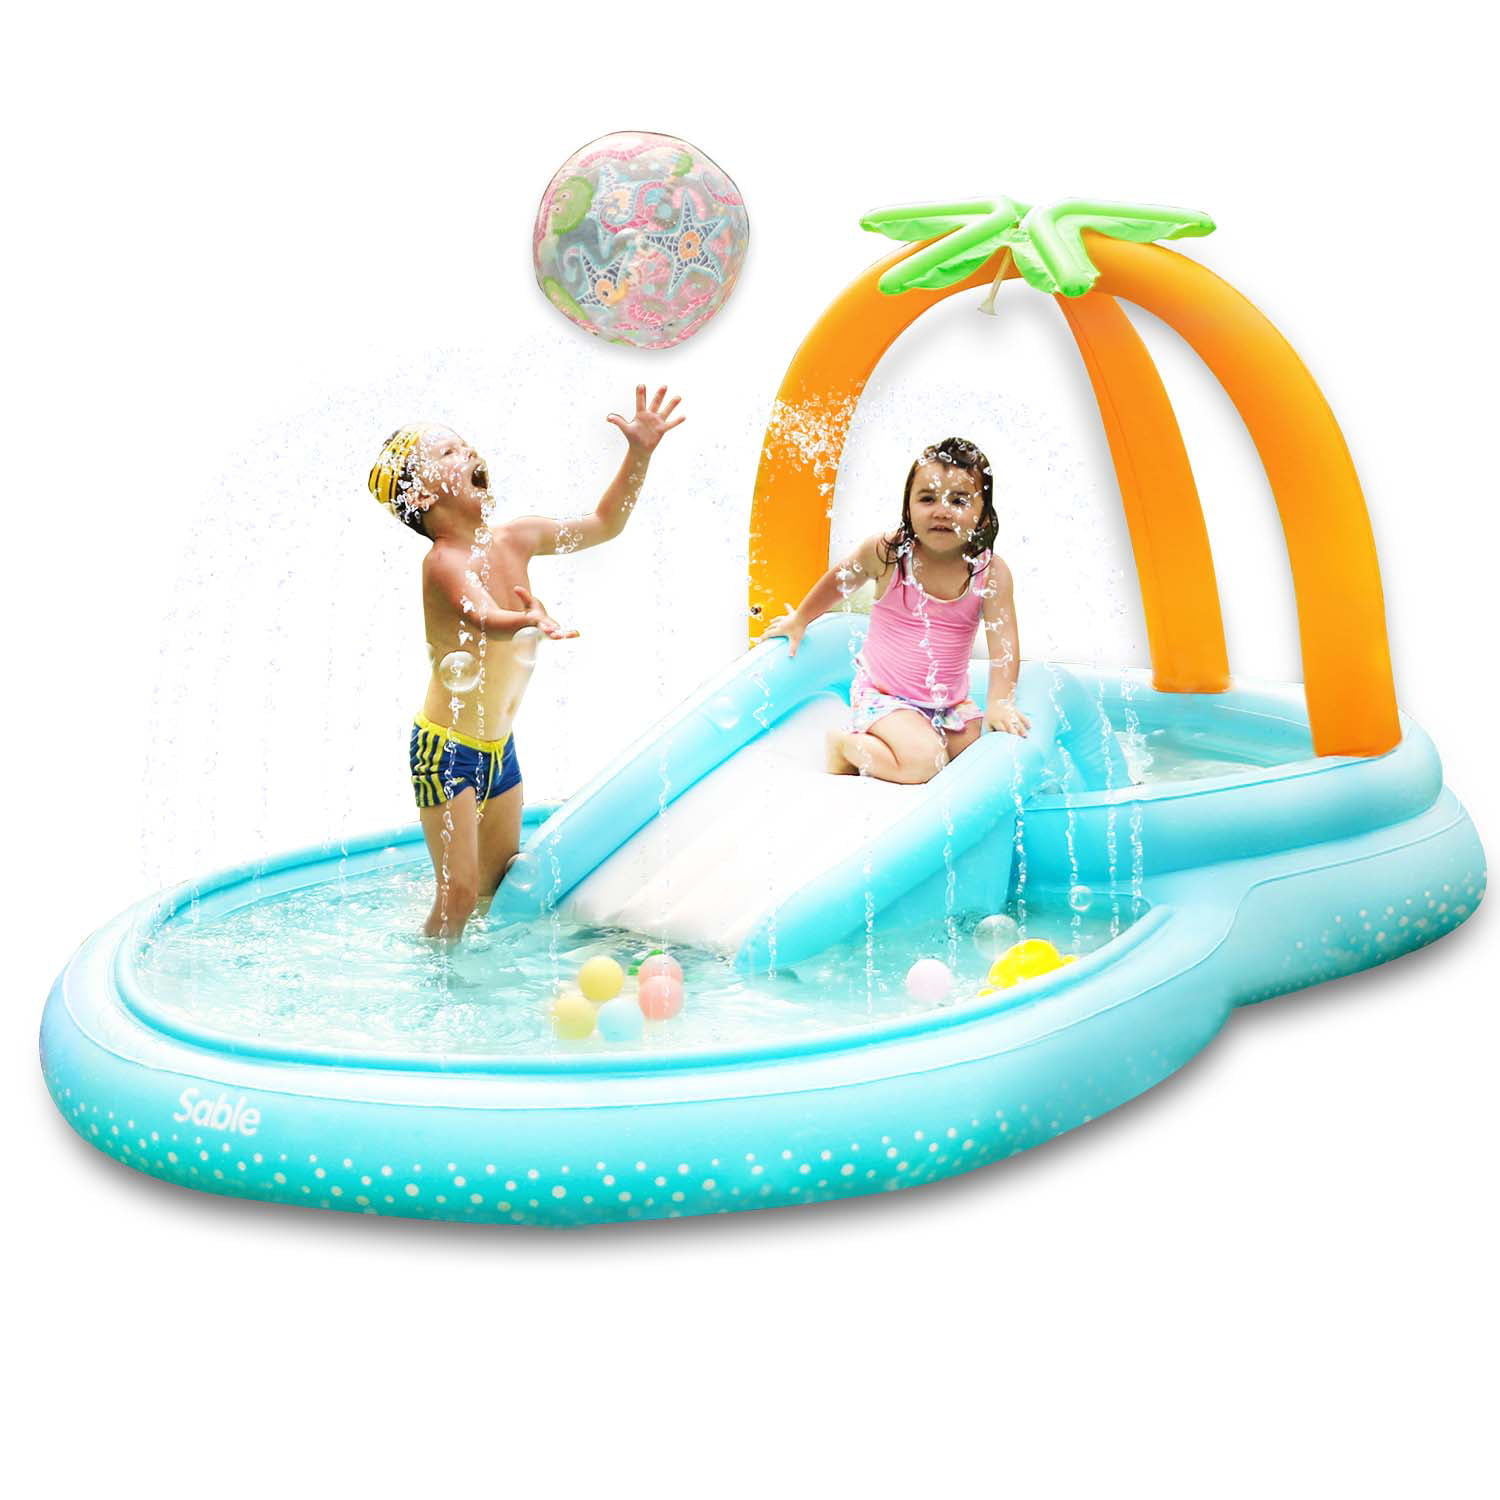 ninRYA “ USA Stock”DHL Fast Delivery Backyard Pools for Family Blow Up Inflatable Pools for Kids Adult Kiddie Pool deep Inflatable Swimming Pool Blue 10FT NOT Include Pump But DHL Delivery 